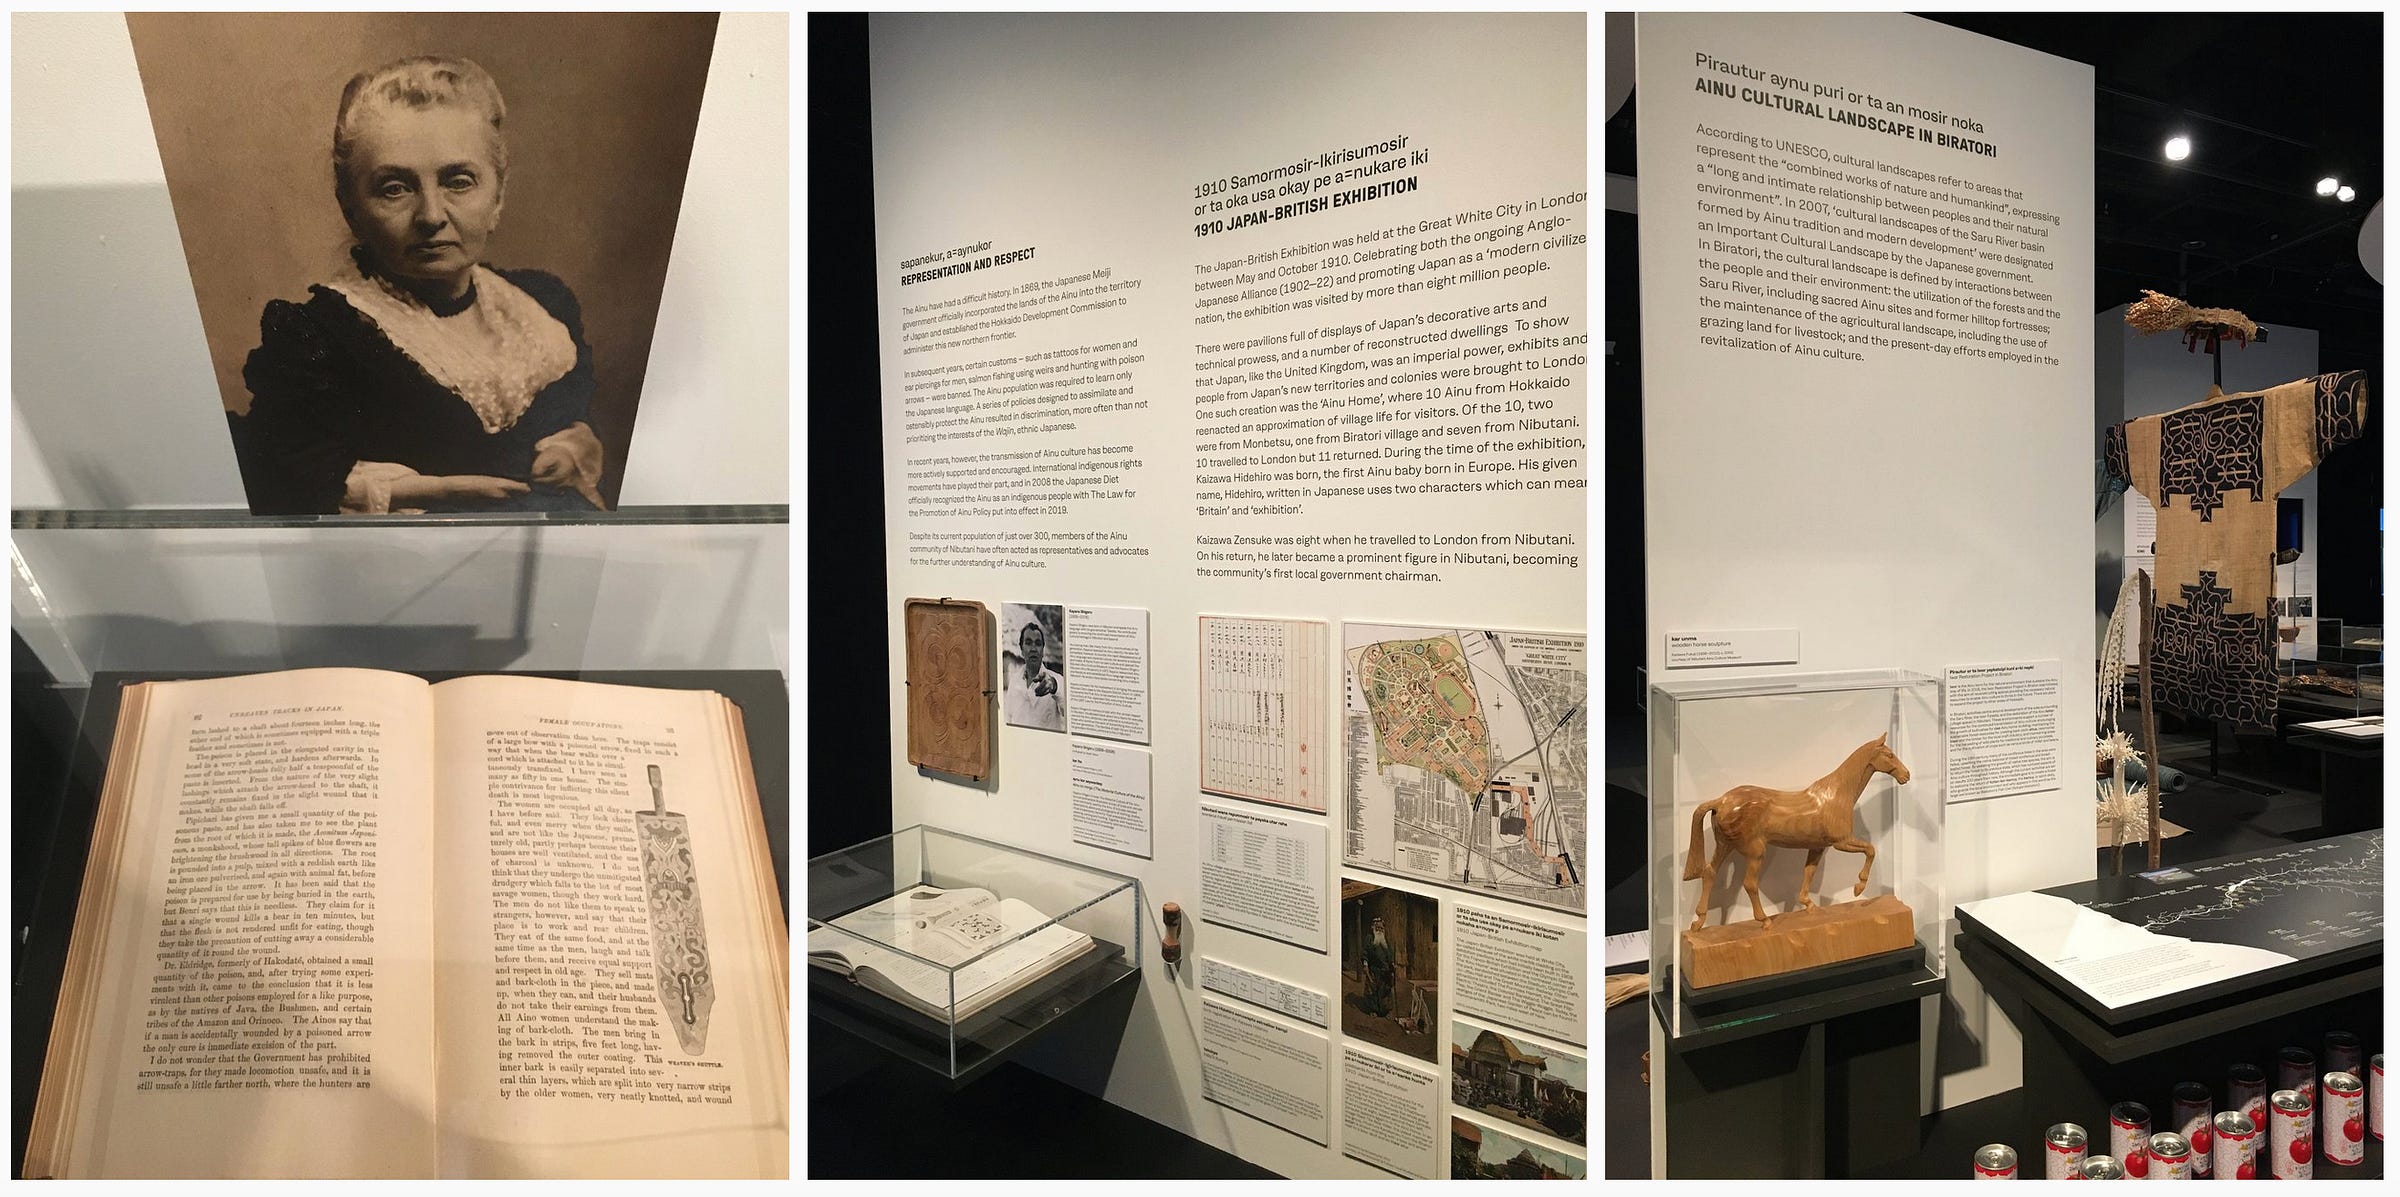 1. Photographic portrait of Isabella Bird and one of her observation books; 2. Part of the exhibit showing artefacts that explain both the discrimination and highlighting of the Ainu people; 3. Part of the exhibit explaining the Ainu cultural landscape with wooden carving of a horse.